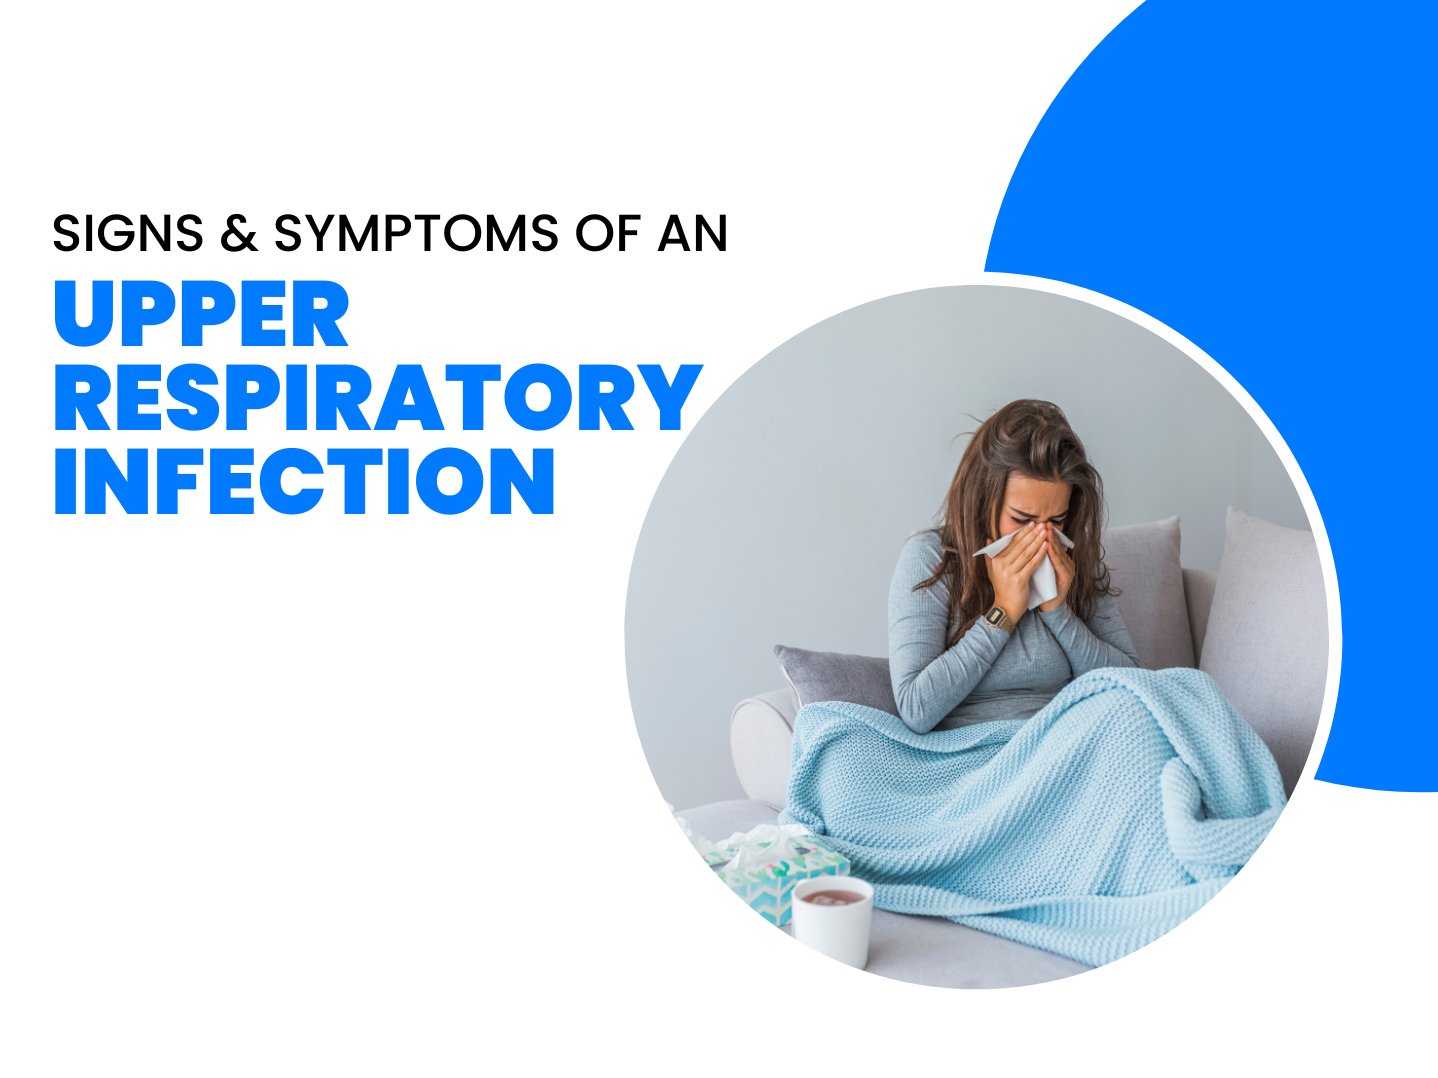 Signs & Symptoms Of An Upper Respiratory Infection (URI)